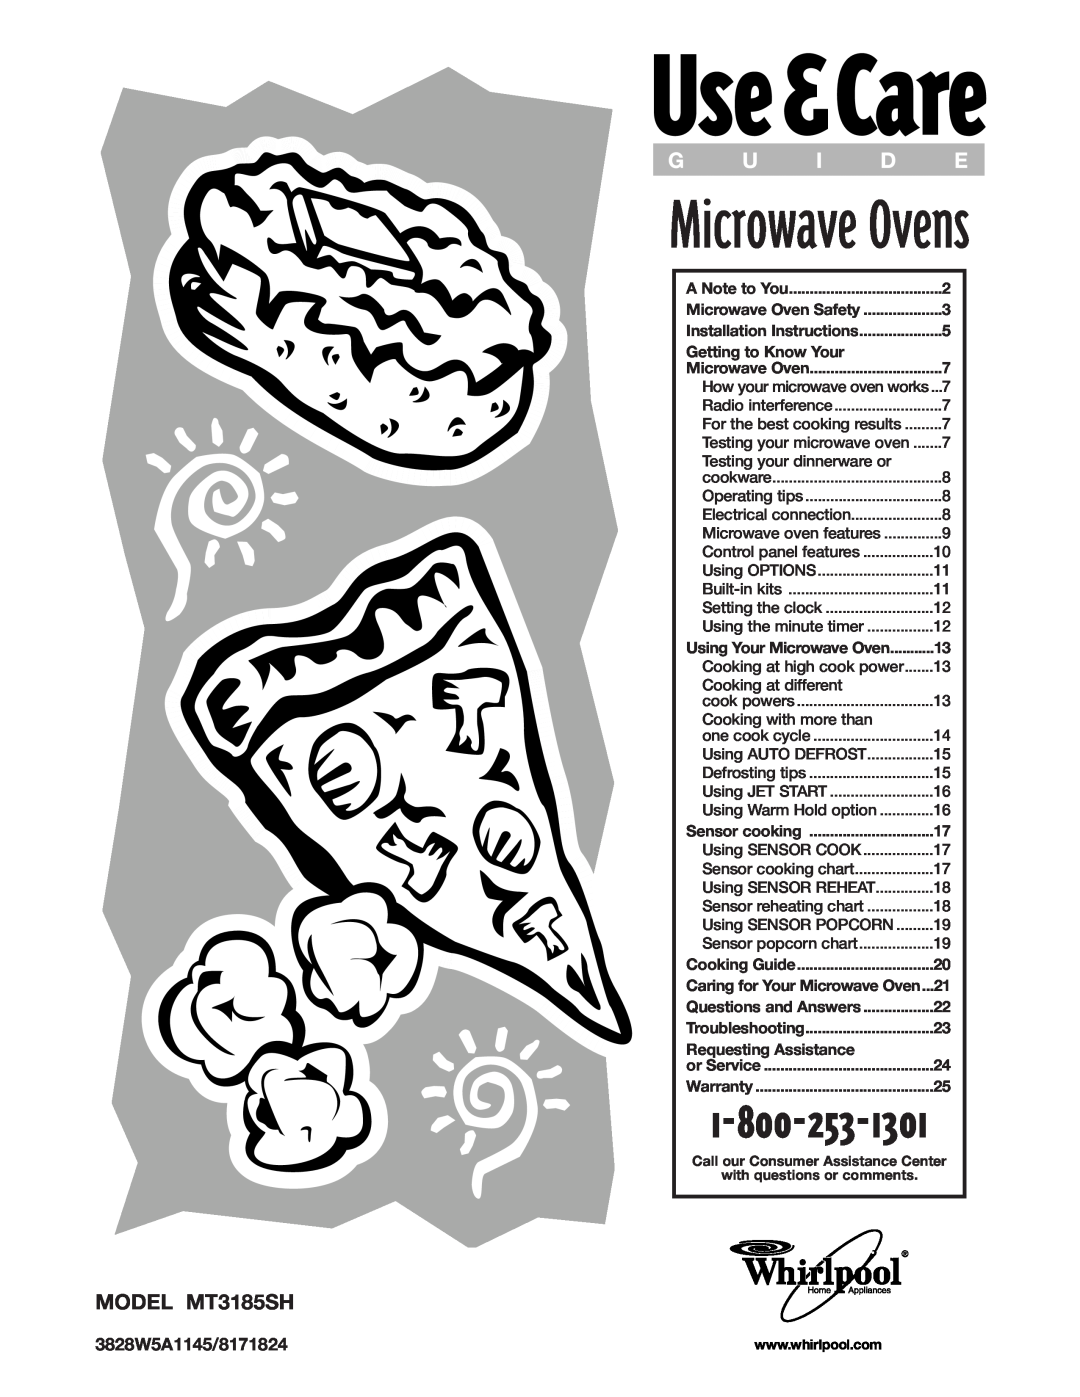 Whirlpool installation instructions Microwave Ovens, MODEL MT3185SH 